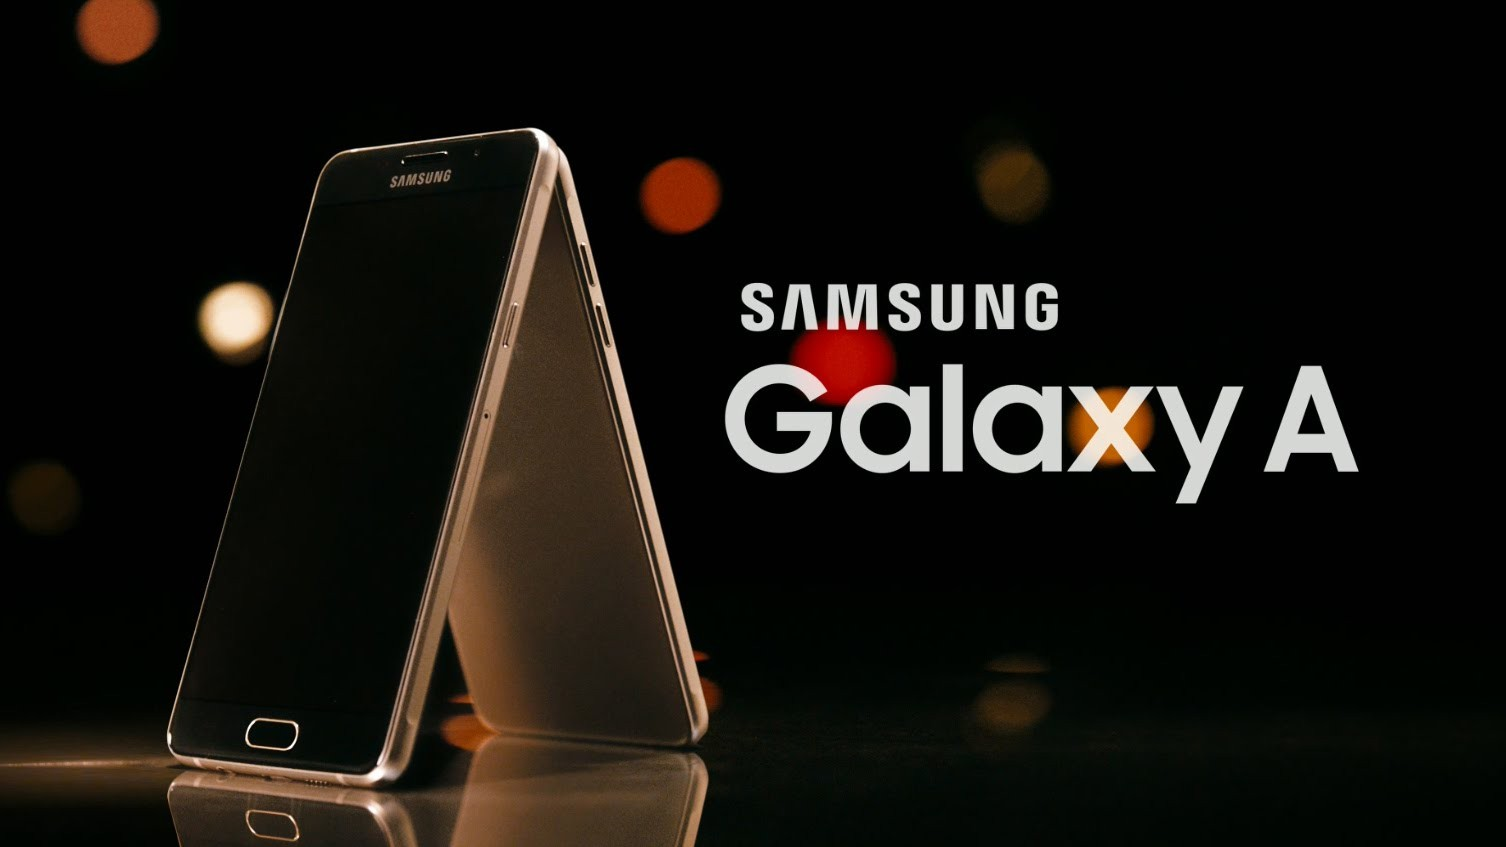 More than 10 years since its launch, Samsung's Galaxy A has always maintained its form and won the sympathy of most users.